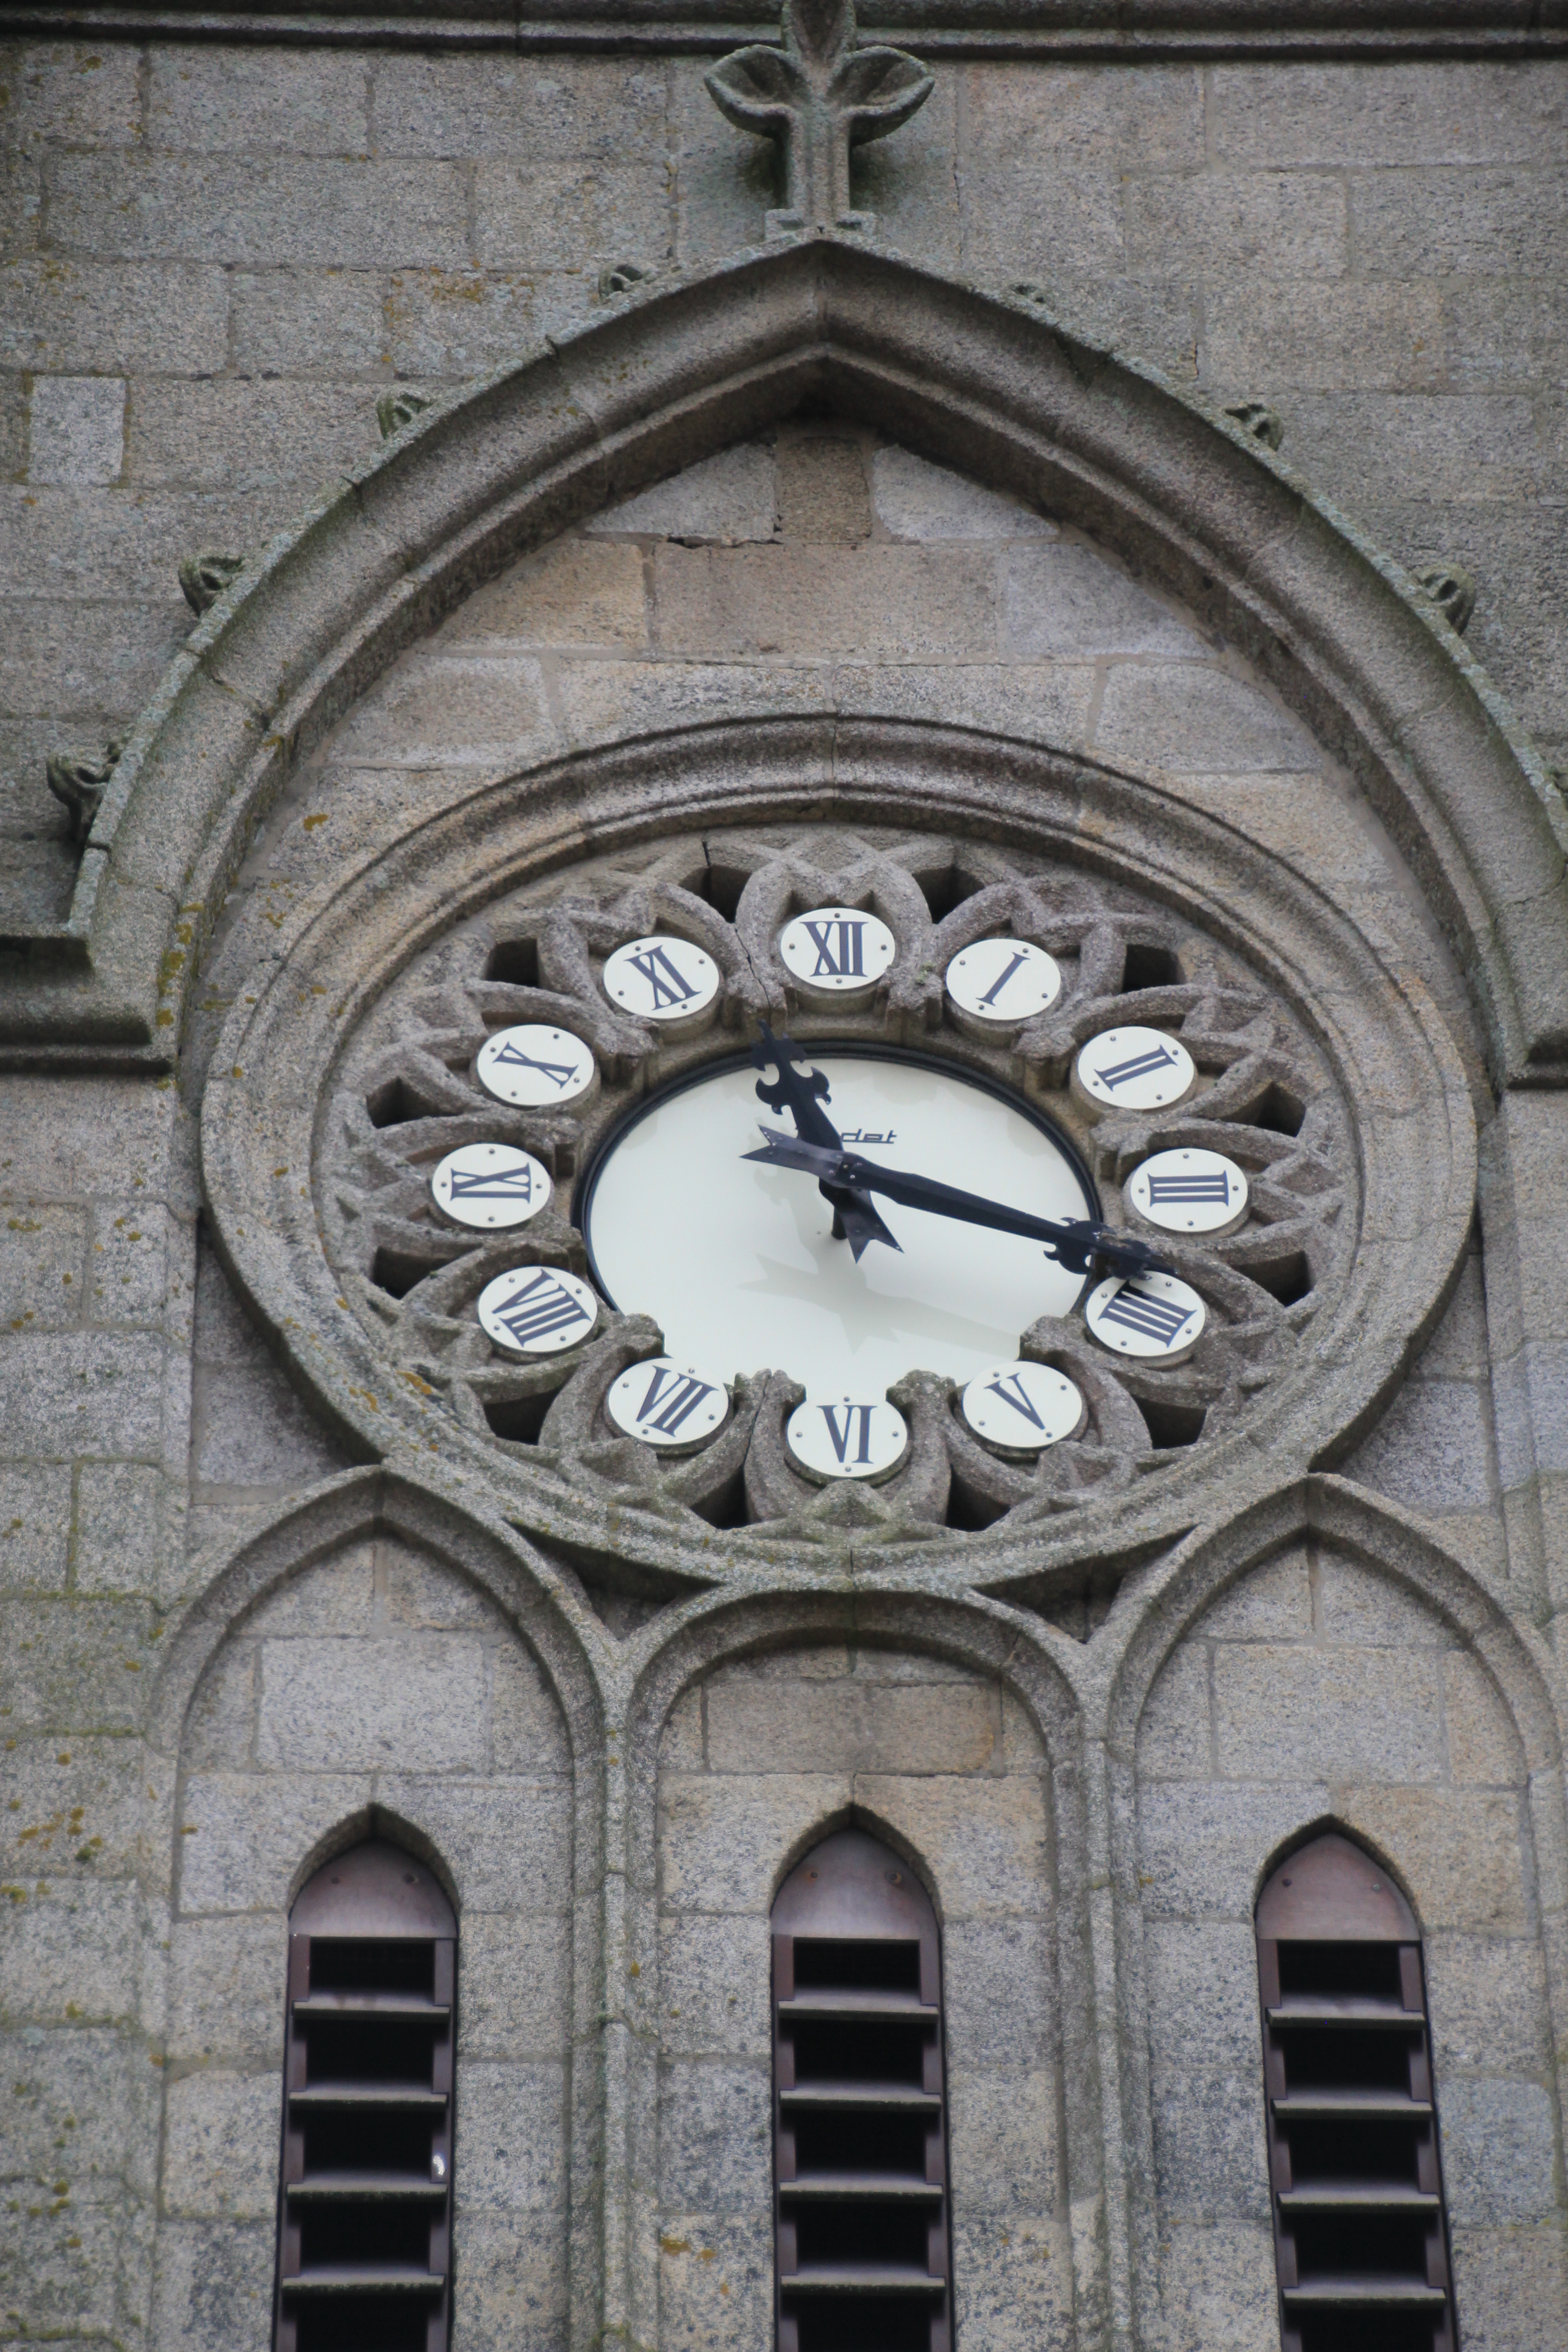 Church clock, Plouescat, Brittany; 02-07-12 | Dave Letcher Photography